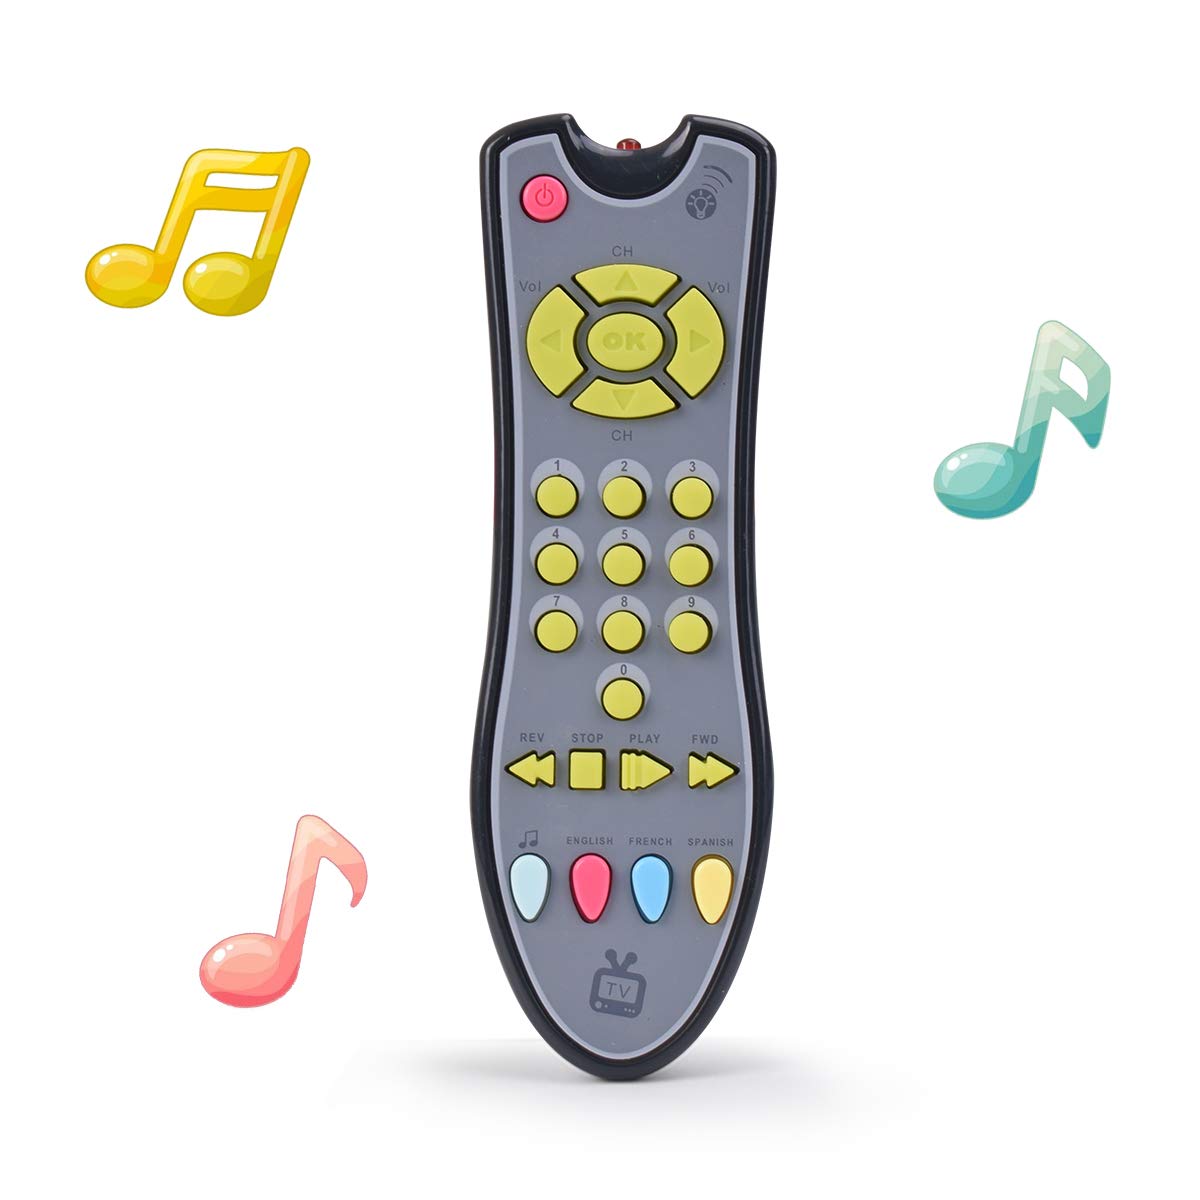 TuiVeSafu Kids Musical TV Remote Control Toy with Light and Sound, Early Education Learning Remote Toy for 6 Months+ Toddlers Boys or Girls